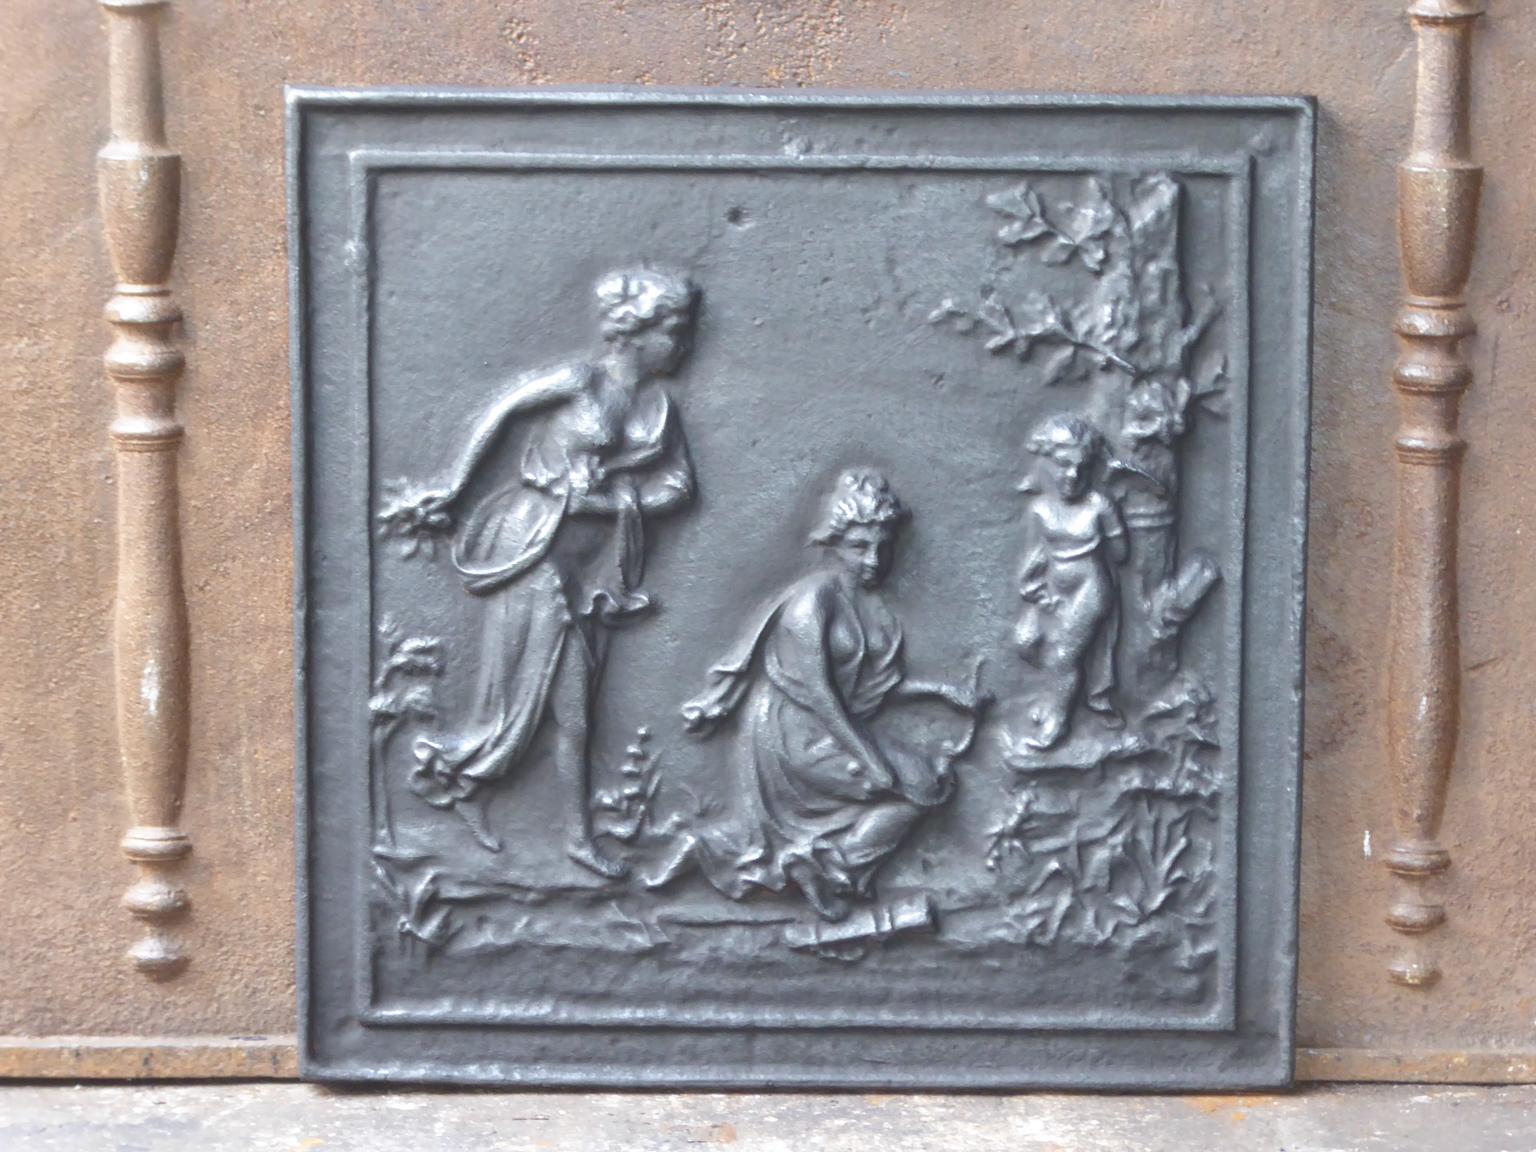 20th century French neoclassical fireback with an allegory of love. The fireback is made of cast iron and has a black or pewter patina. It is in a good condition and does not have cracks.